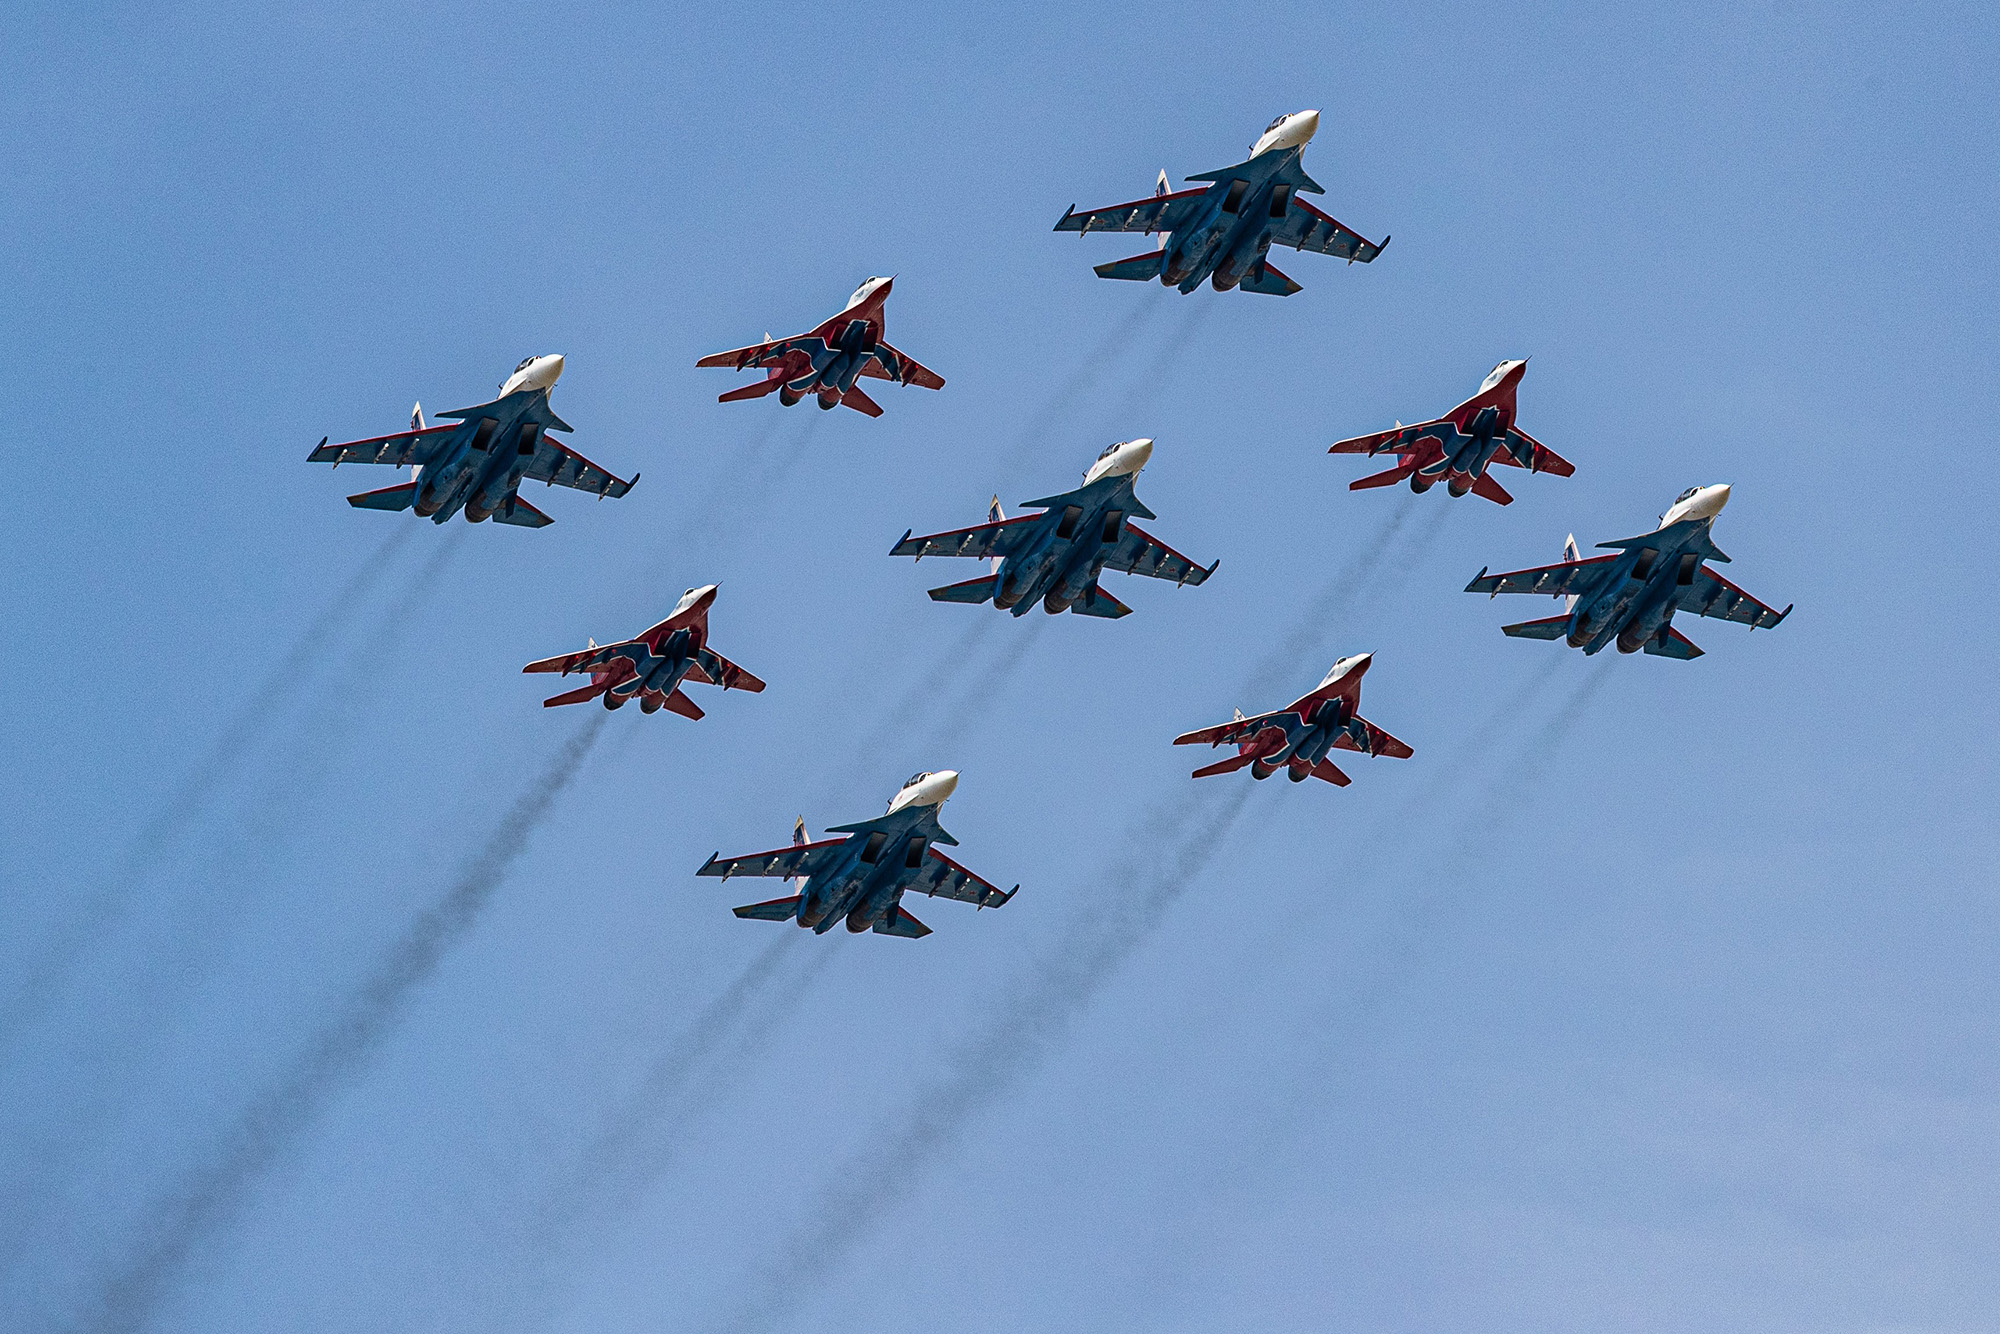 MiG-29 jet fighters of the Strizhi Swifts and Su-30SM jet fighters of the Russkiye Vityazi, Russian Knights, aerobatic teams take part in a rehearsal for the Victory Day parade in Moscow, Russia, on May 7.